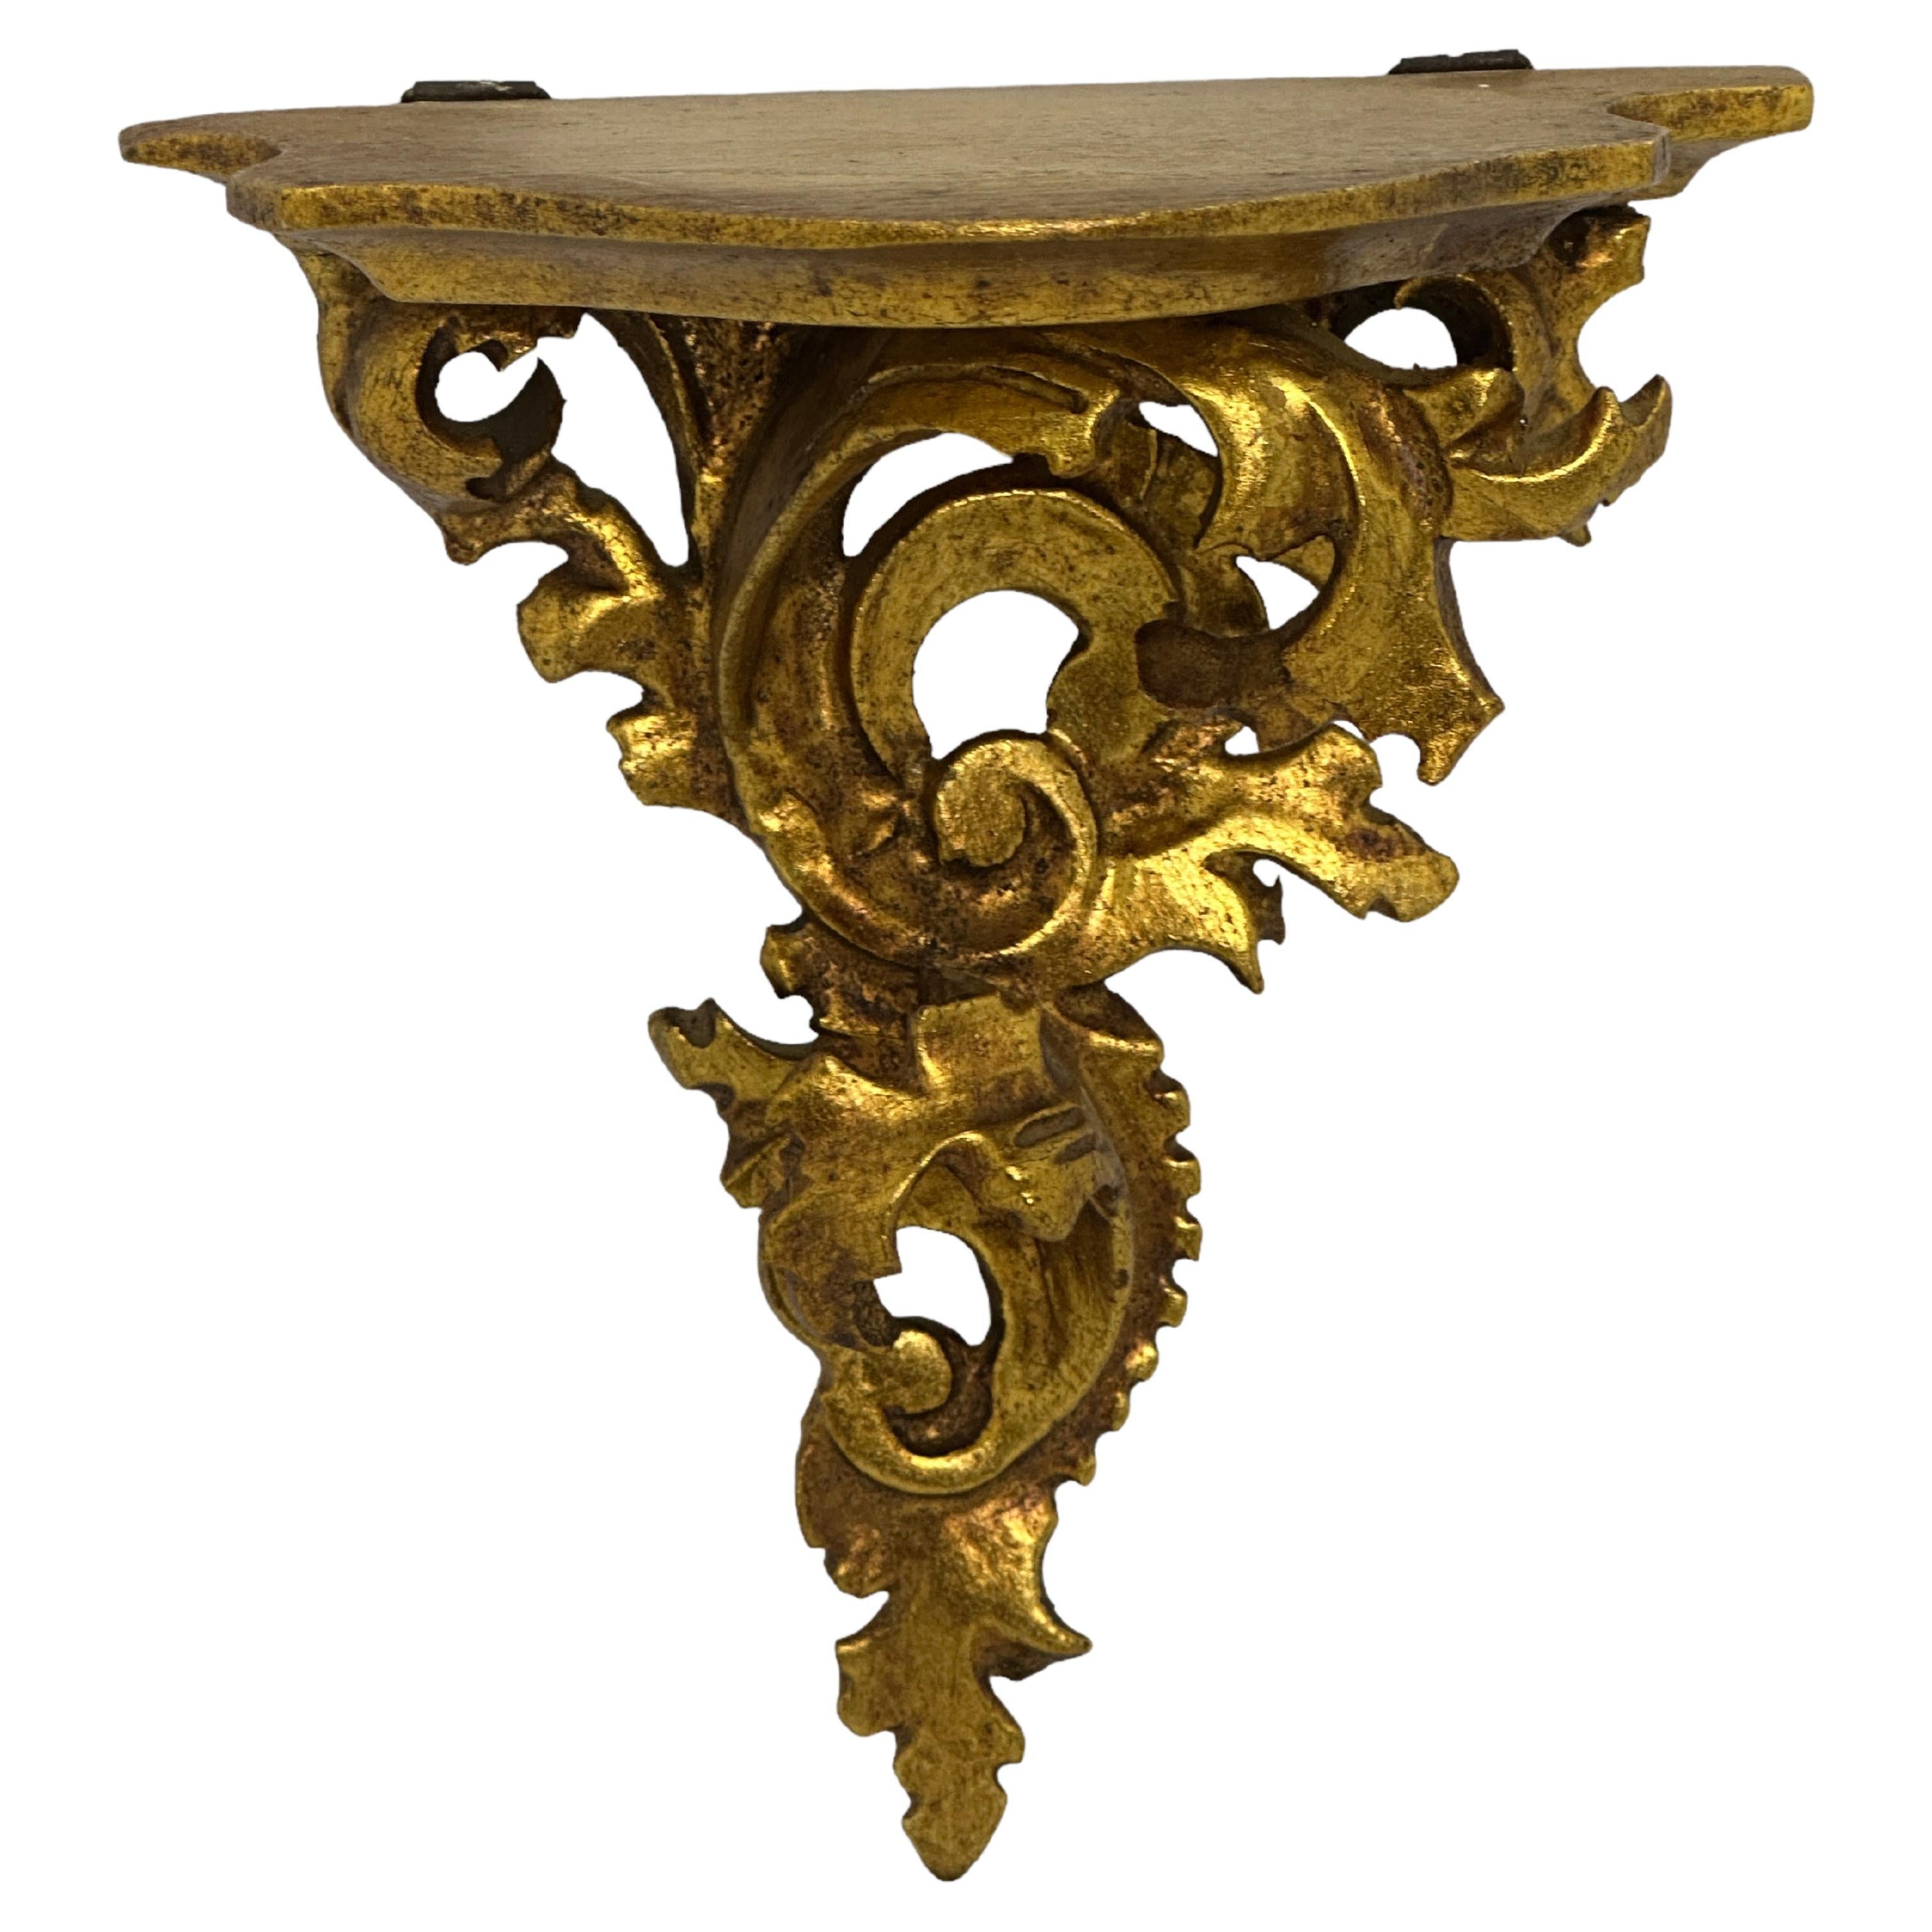 Italian Old Venetian Miniature Wall Shelf, Gilded Carved Acanthus, Rococo Style